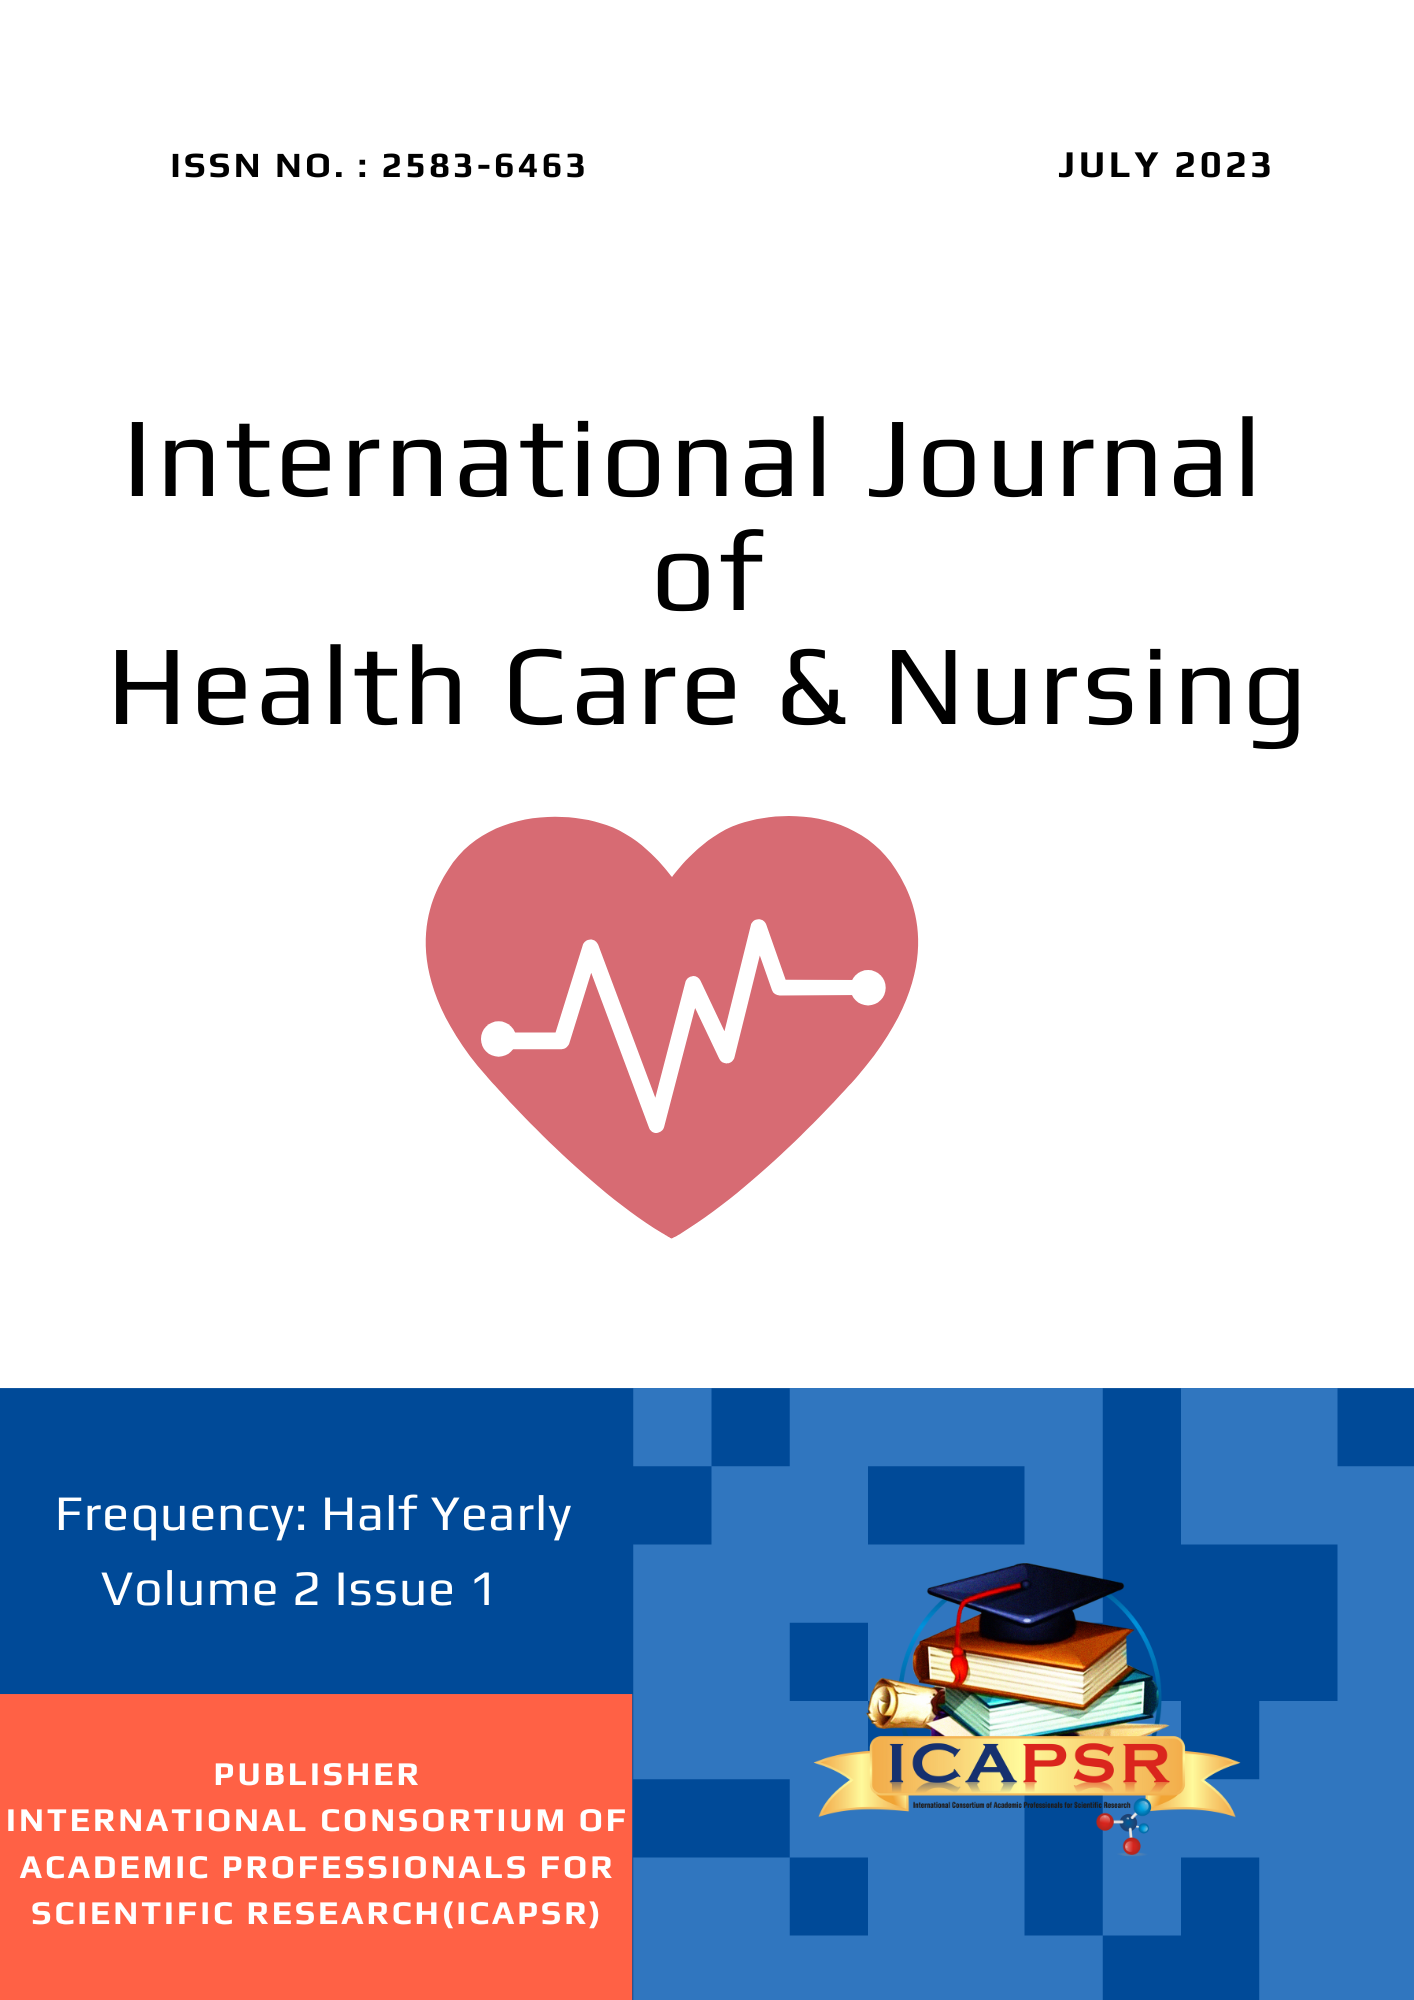                     View Vol. 2 No. 1 (2023): International Journal of Health Care and Nursing (July Issue)
                